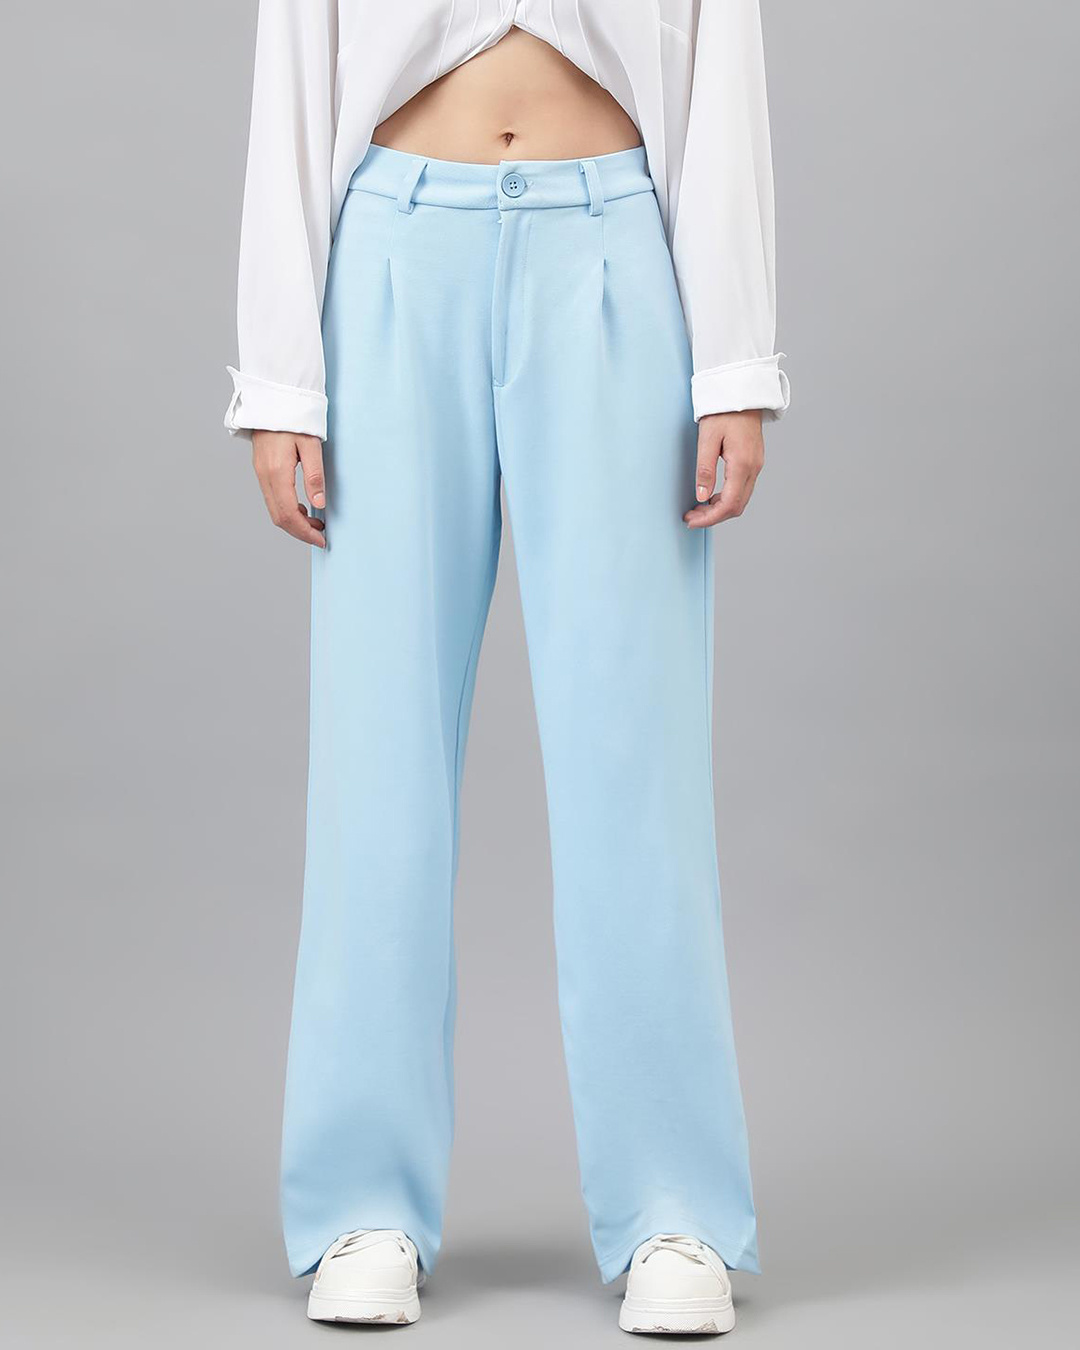 Buy Women's Sky Blue Straight Fit Trousers Online at Bewakoof